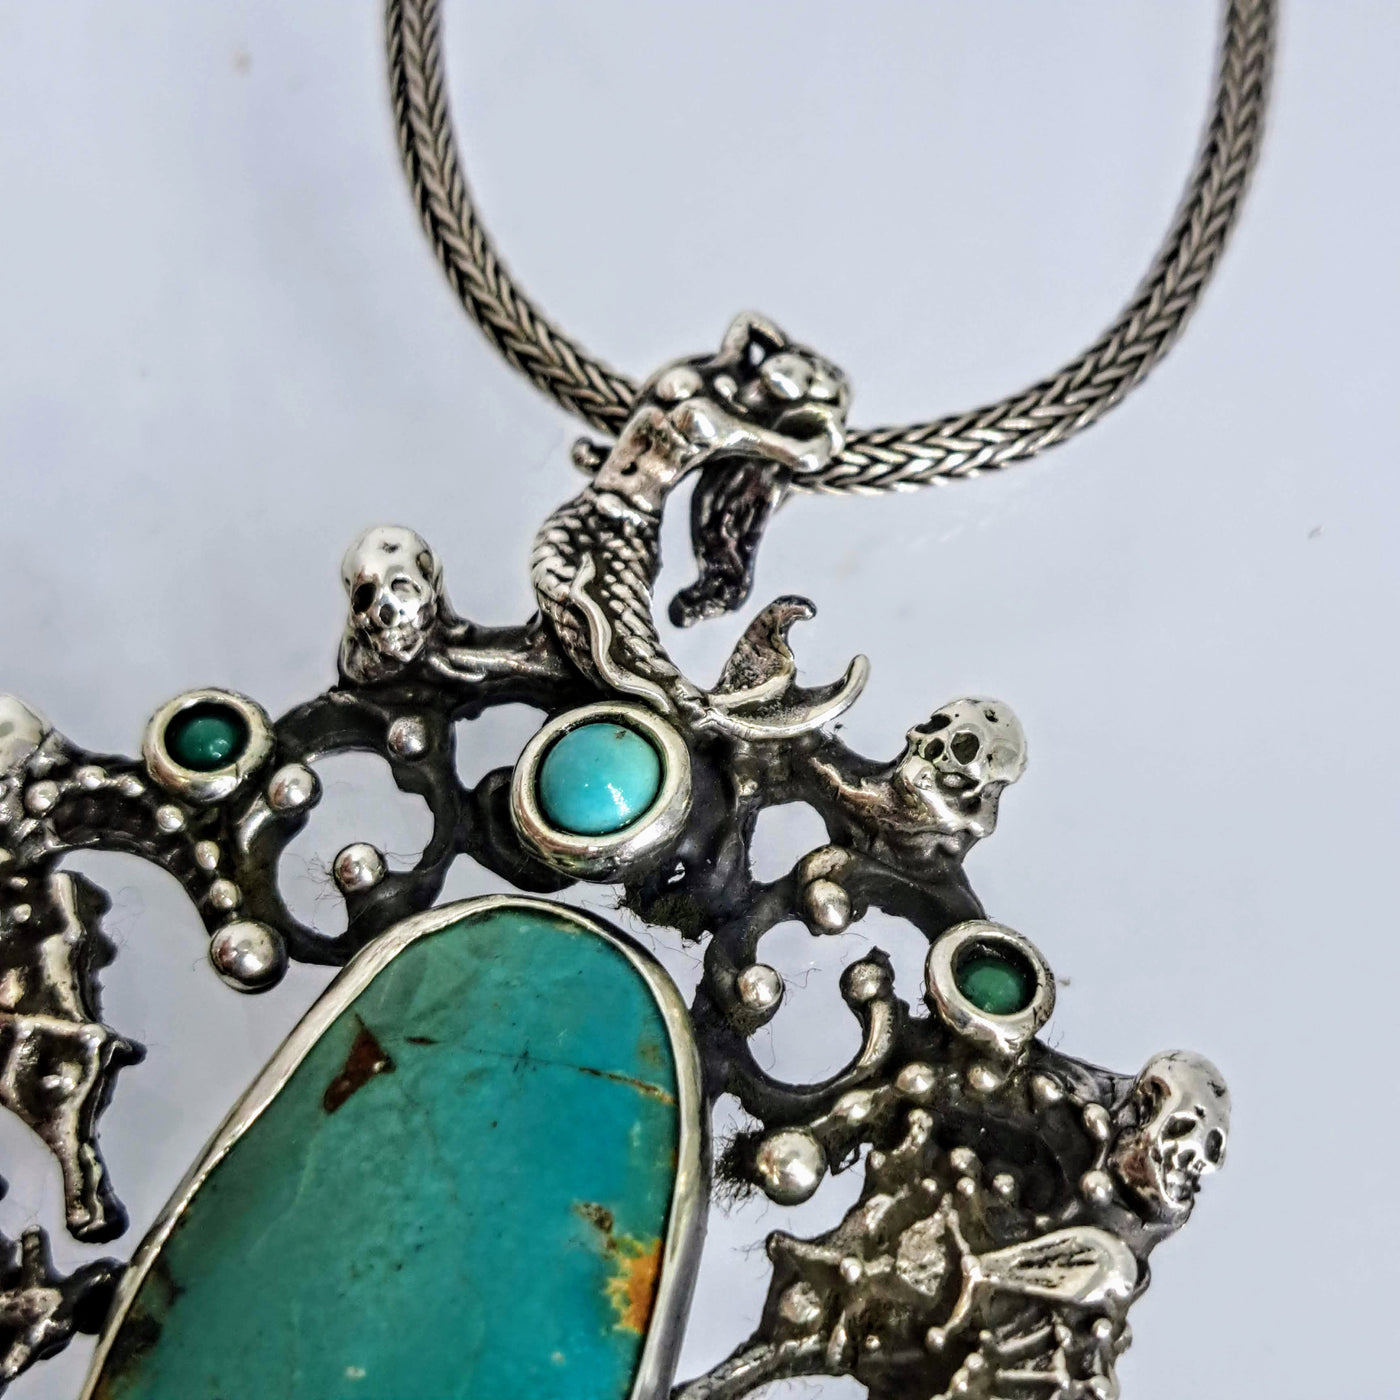 "Dead Men Tell No Tales" Pendant Necklace - Turquoise, Sterling